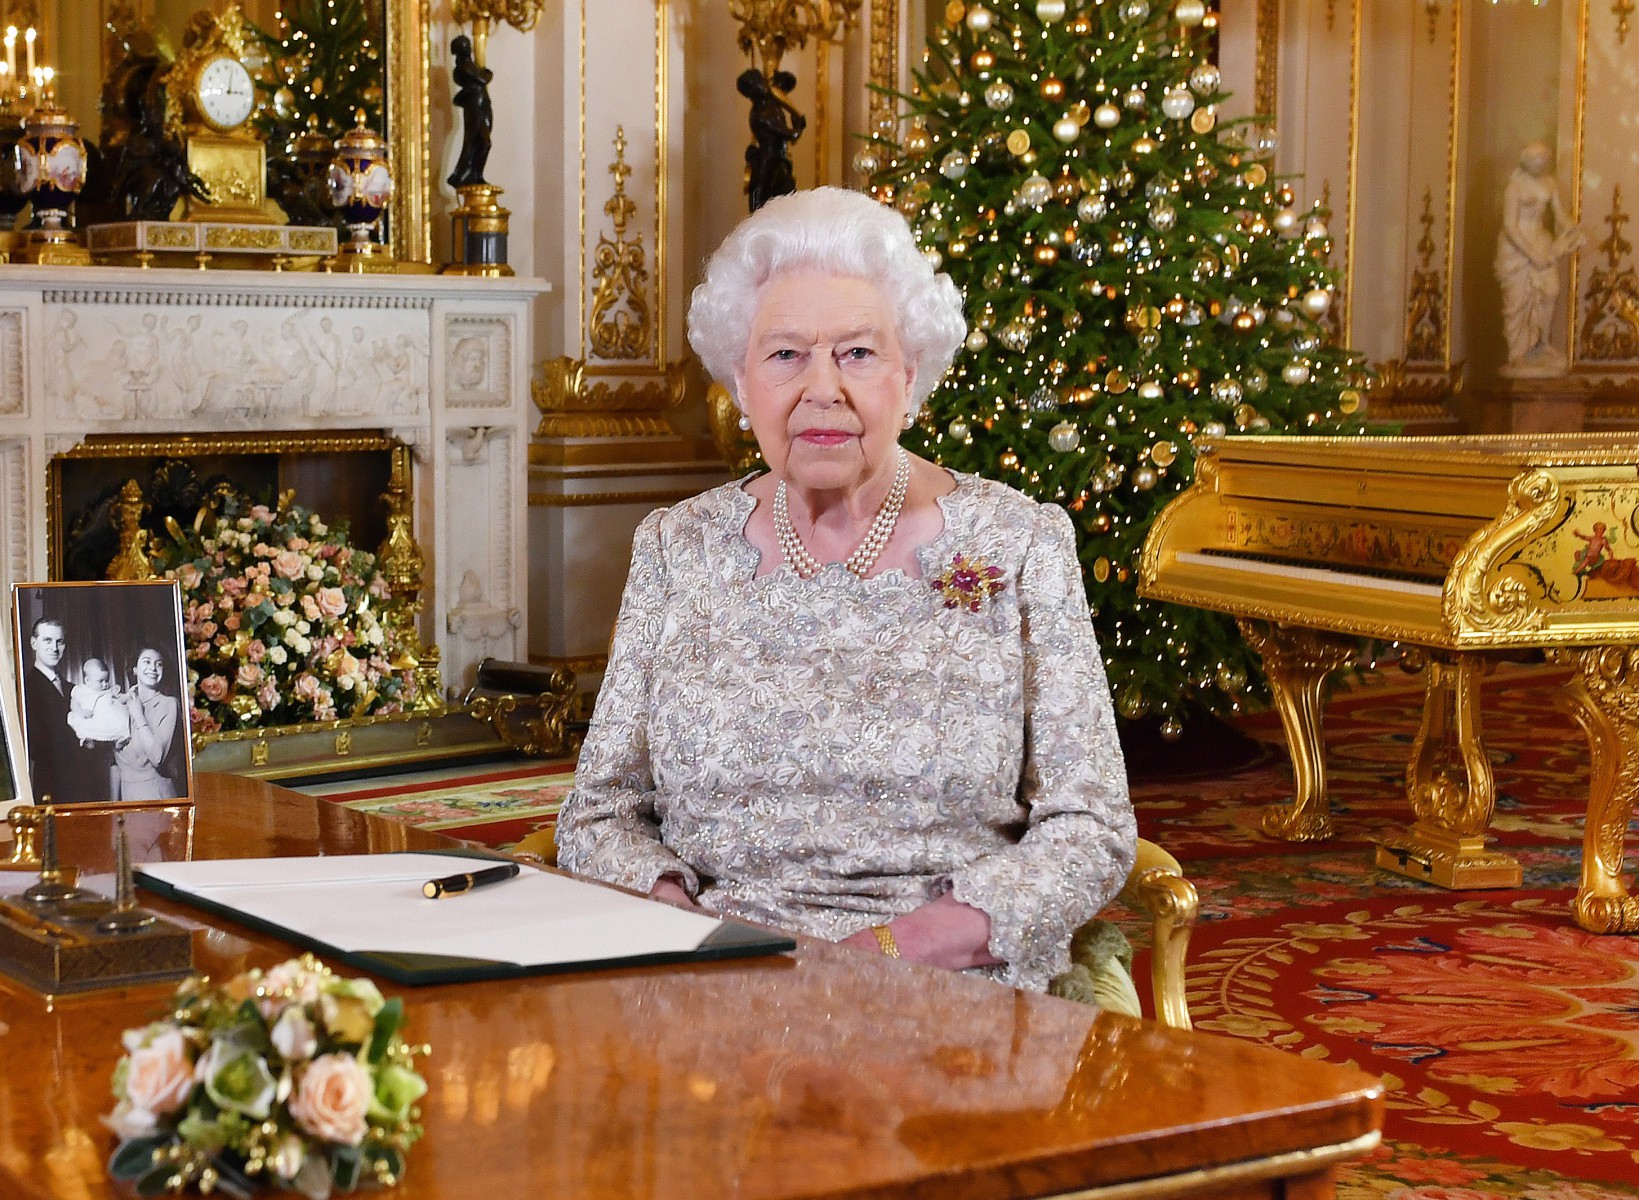 The Queen is said to give out 620 gifts to her staff and family, according to a former aide